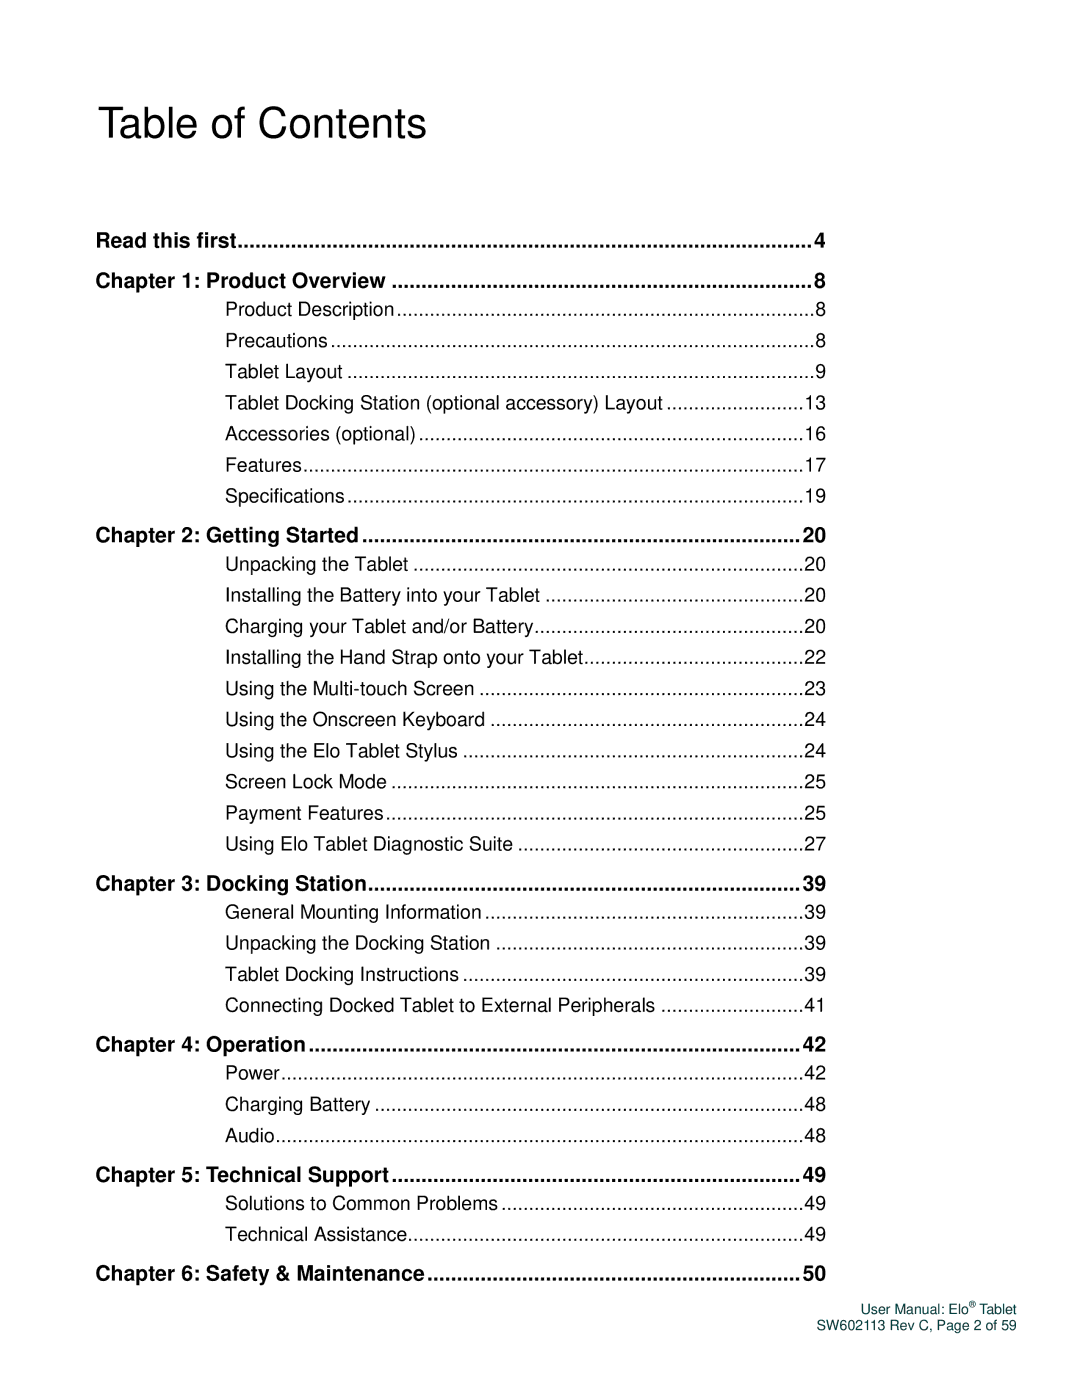 Elo TouchSystems SW602113 manual Table of Contents 